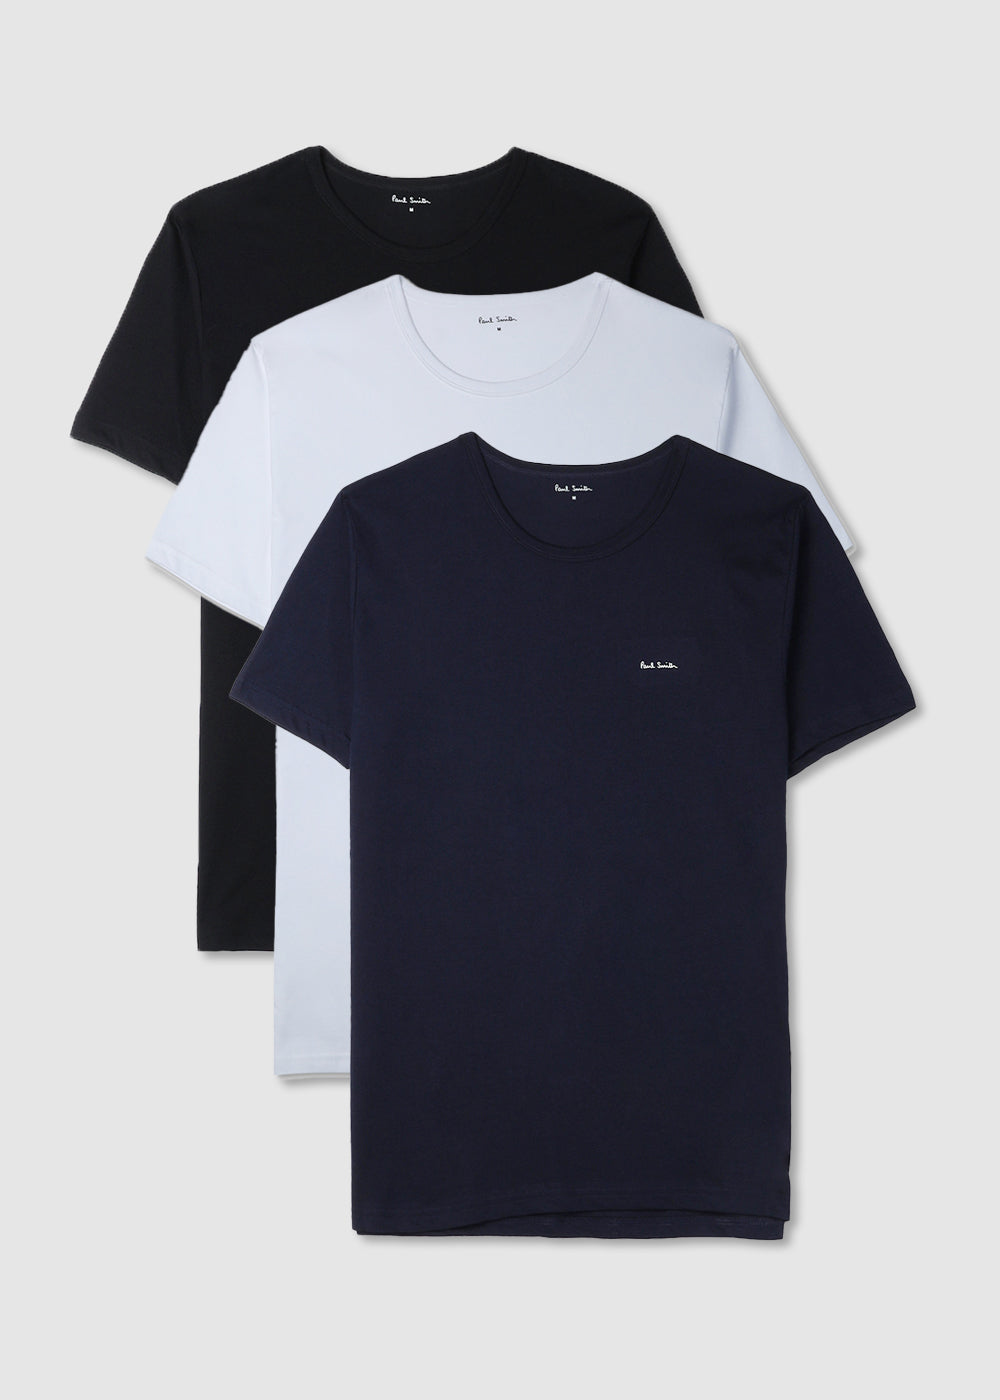 Image of Paul Smith Mens 3 Pack T Shirt In Black